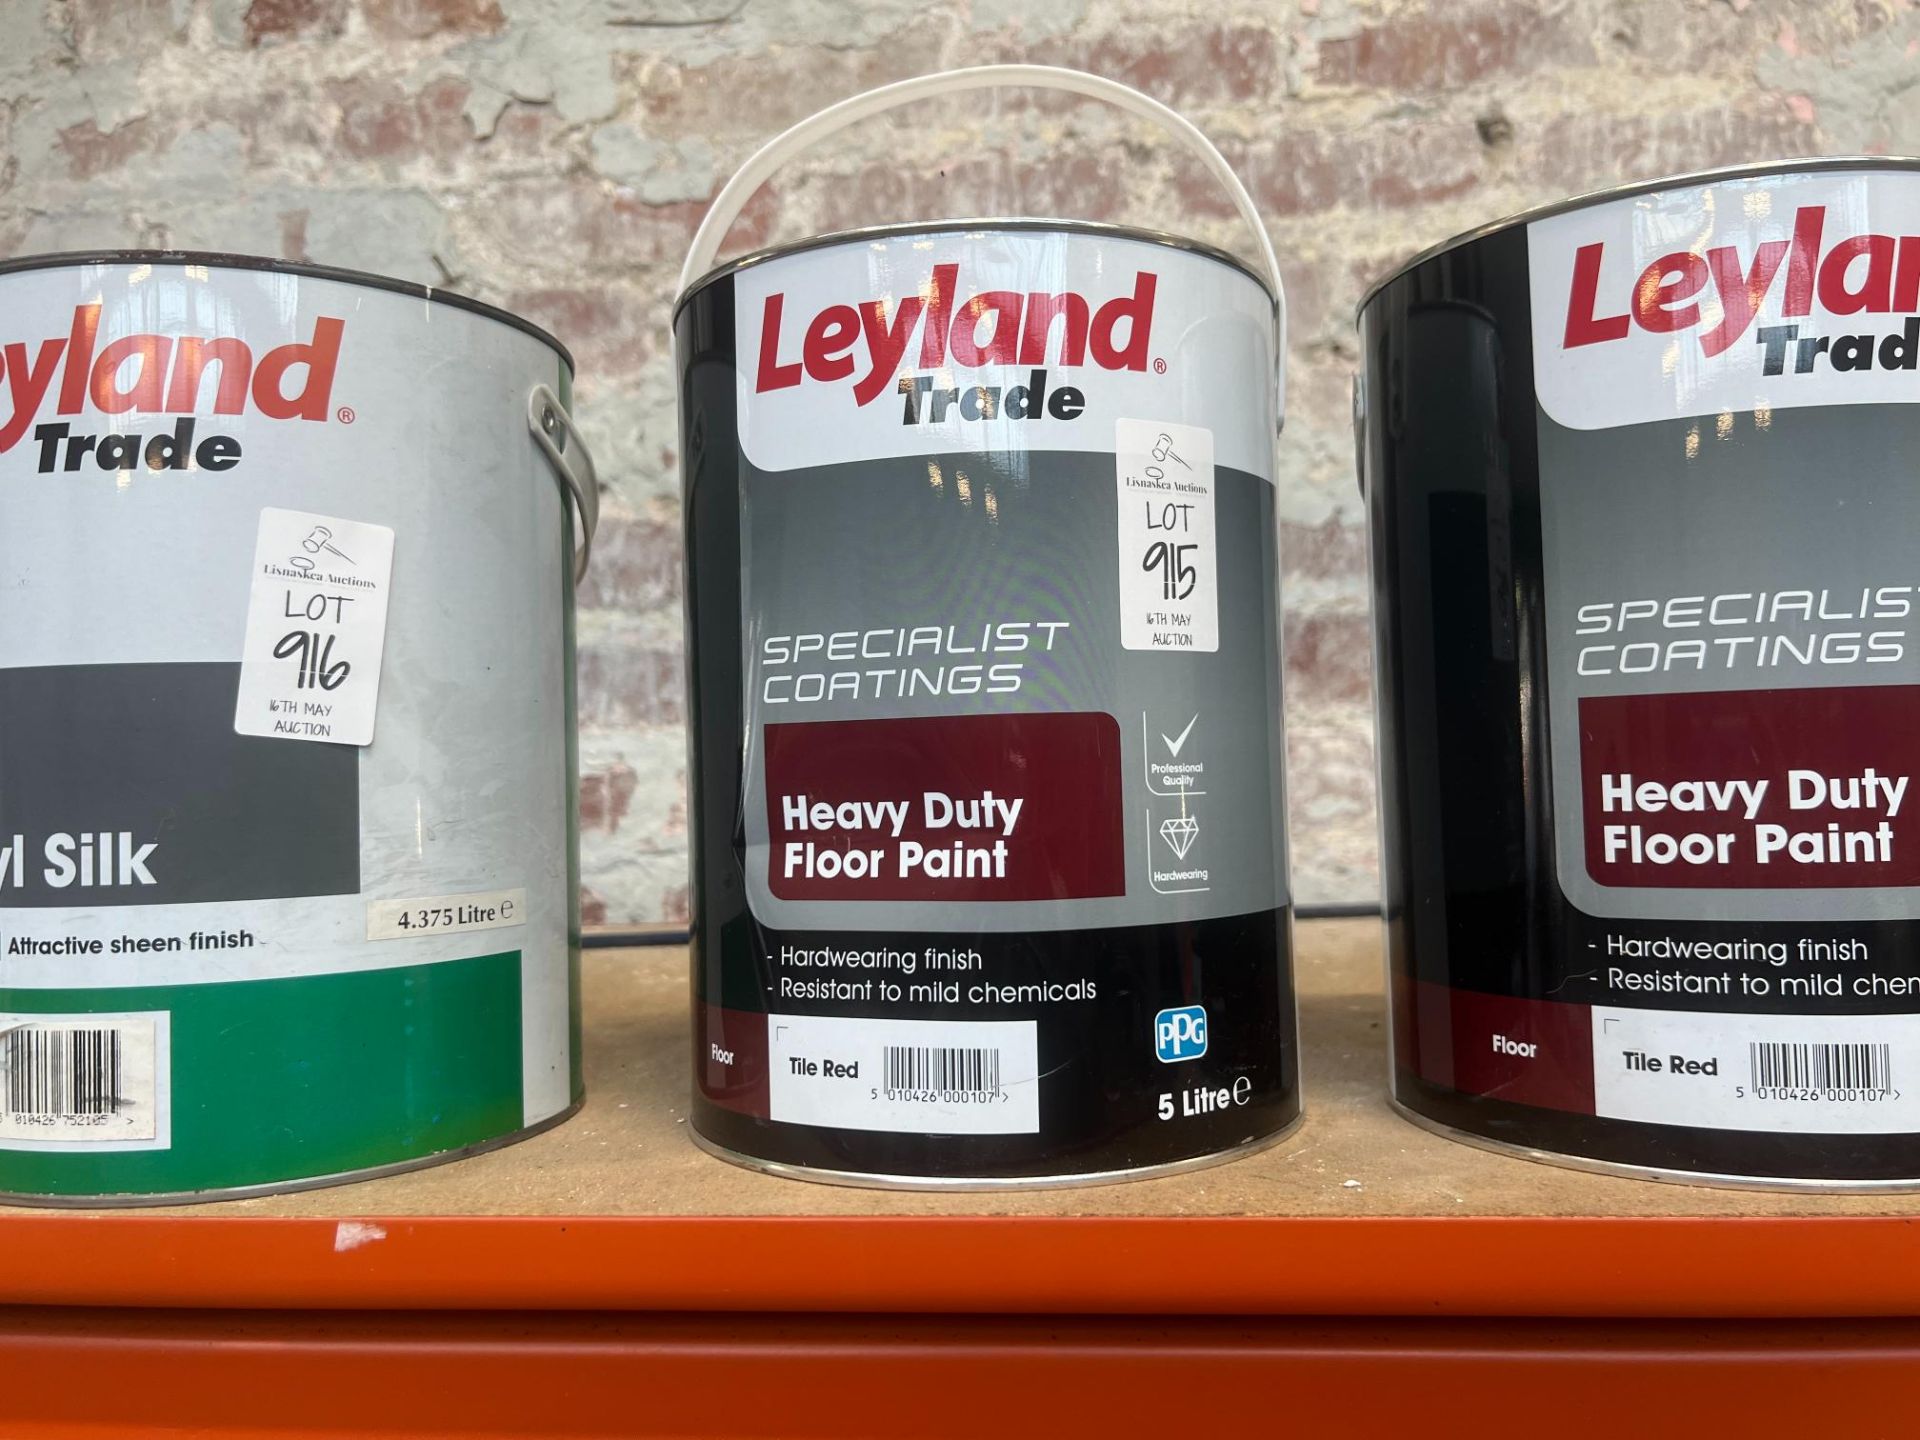 5L OF LEYLAND TRADE TILE RED HEAVY DUTY FLOOR PAINT